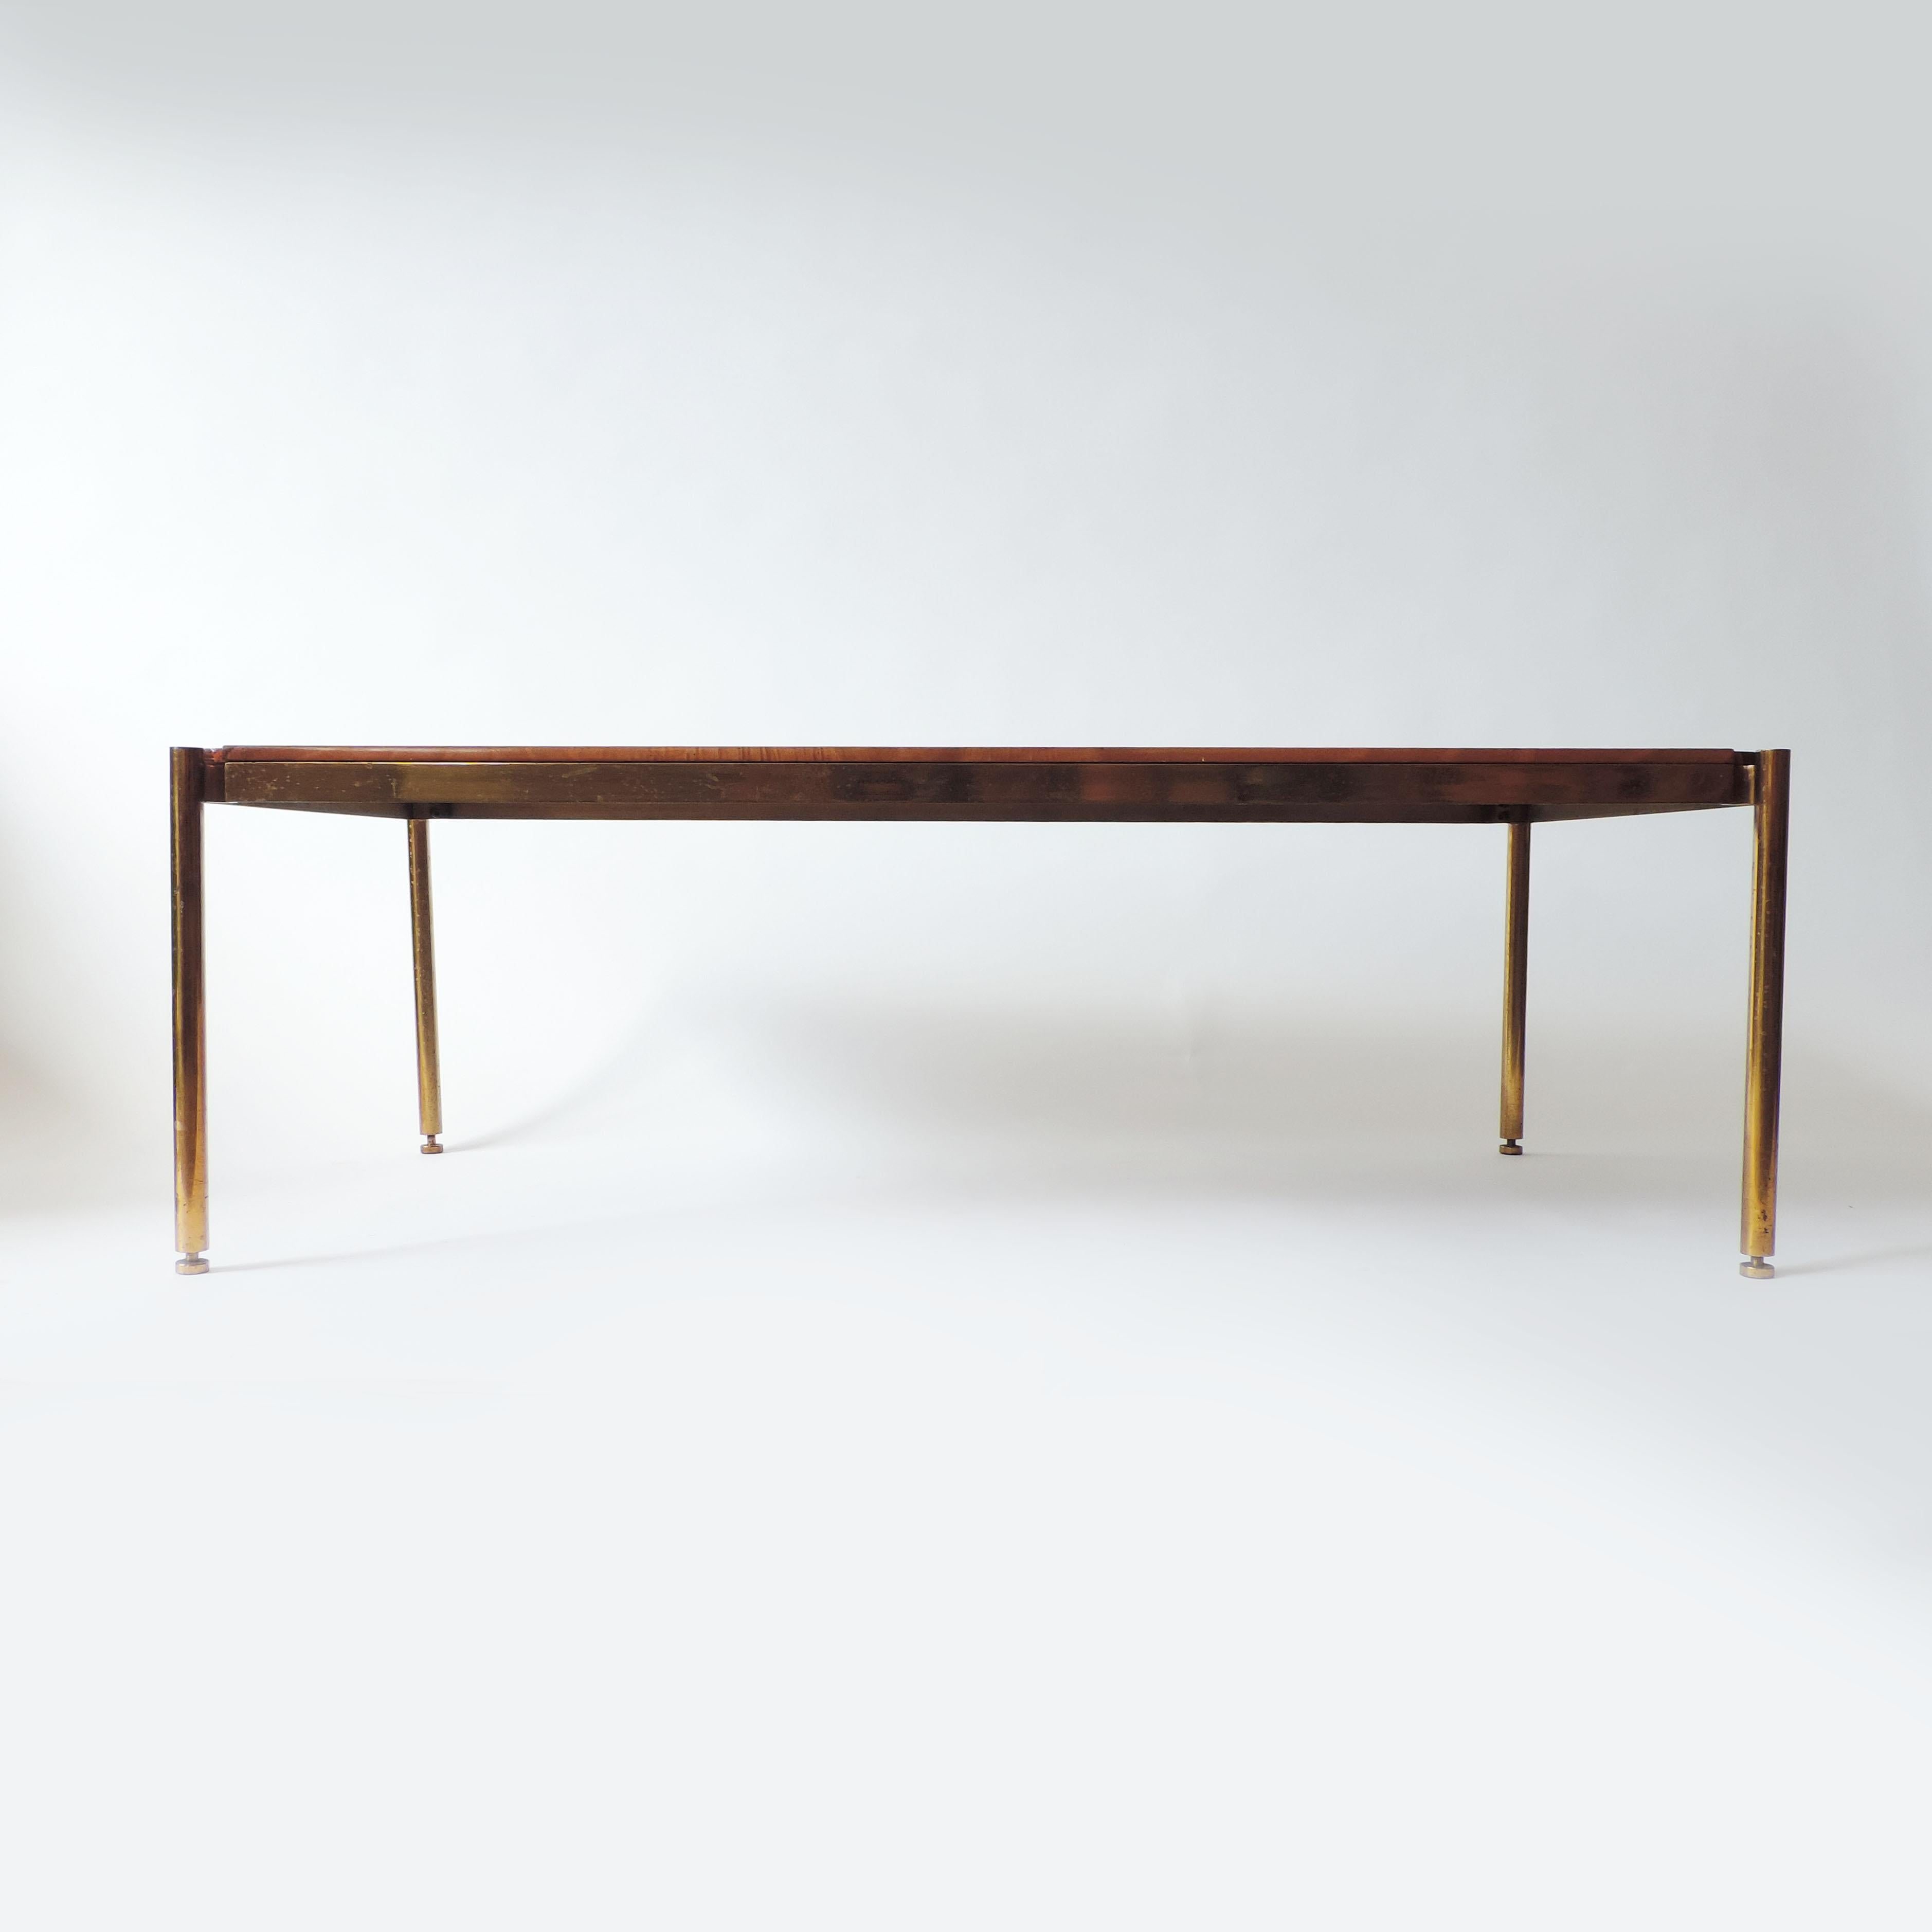 Mid-20th Century Osvaldo Borsani Wooden Stripes Top and Brass Coffee Table for Tecno, Italy 1950s For Sale